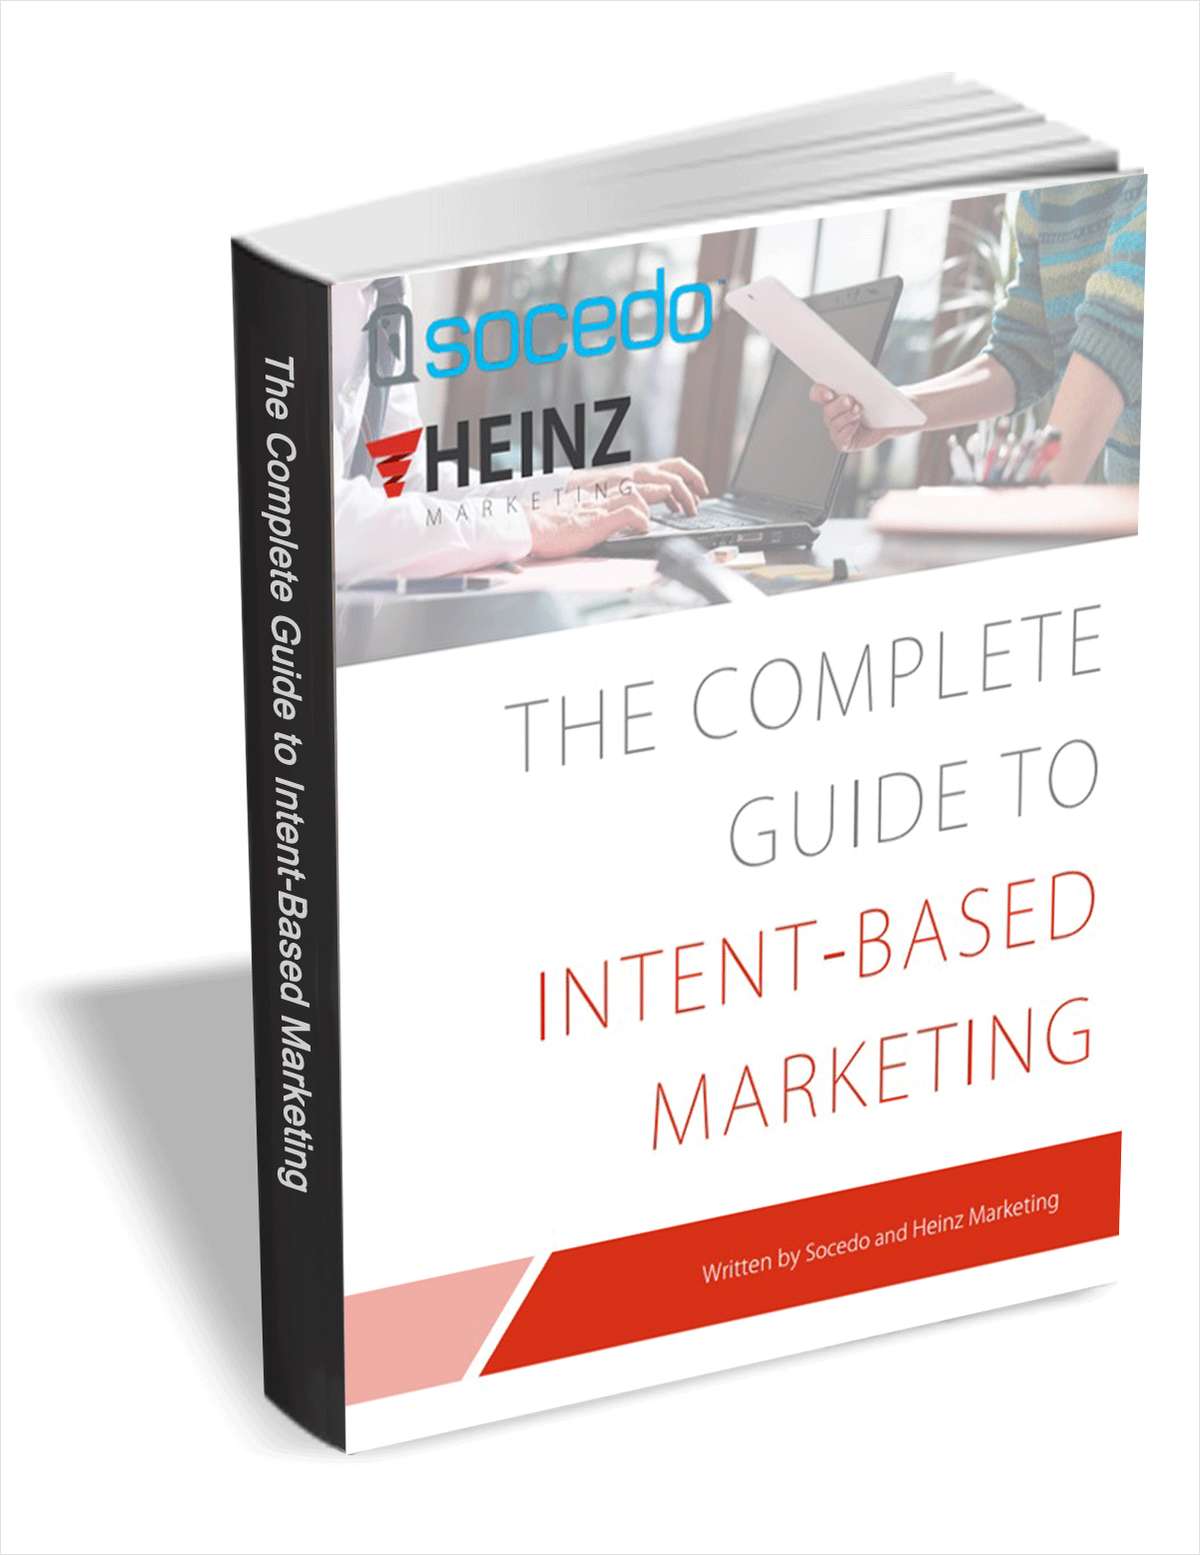 The Complete Guide to Intent-Based Marketing